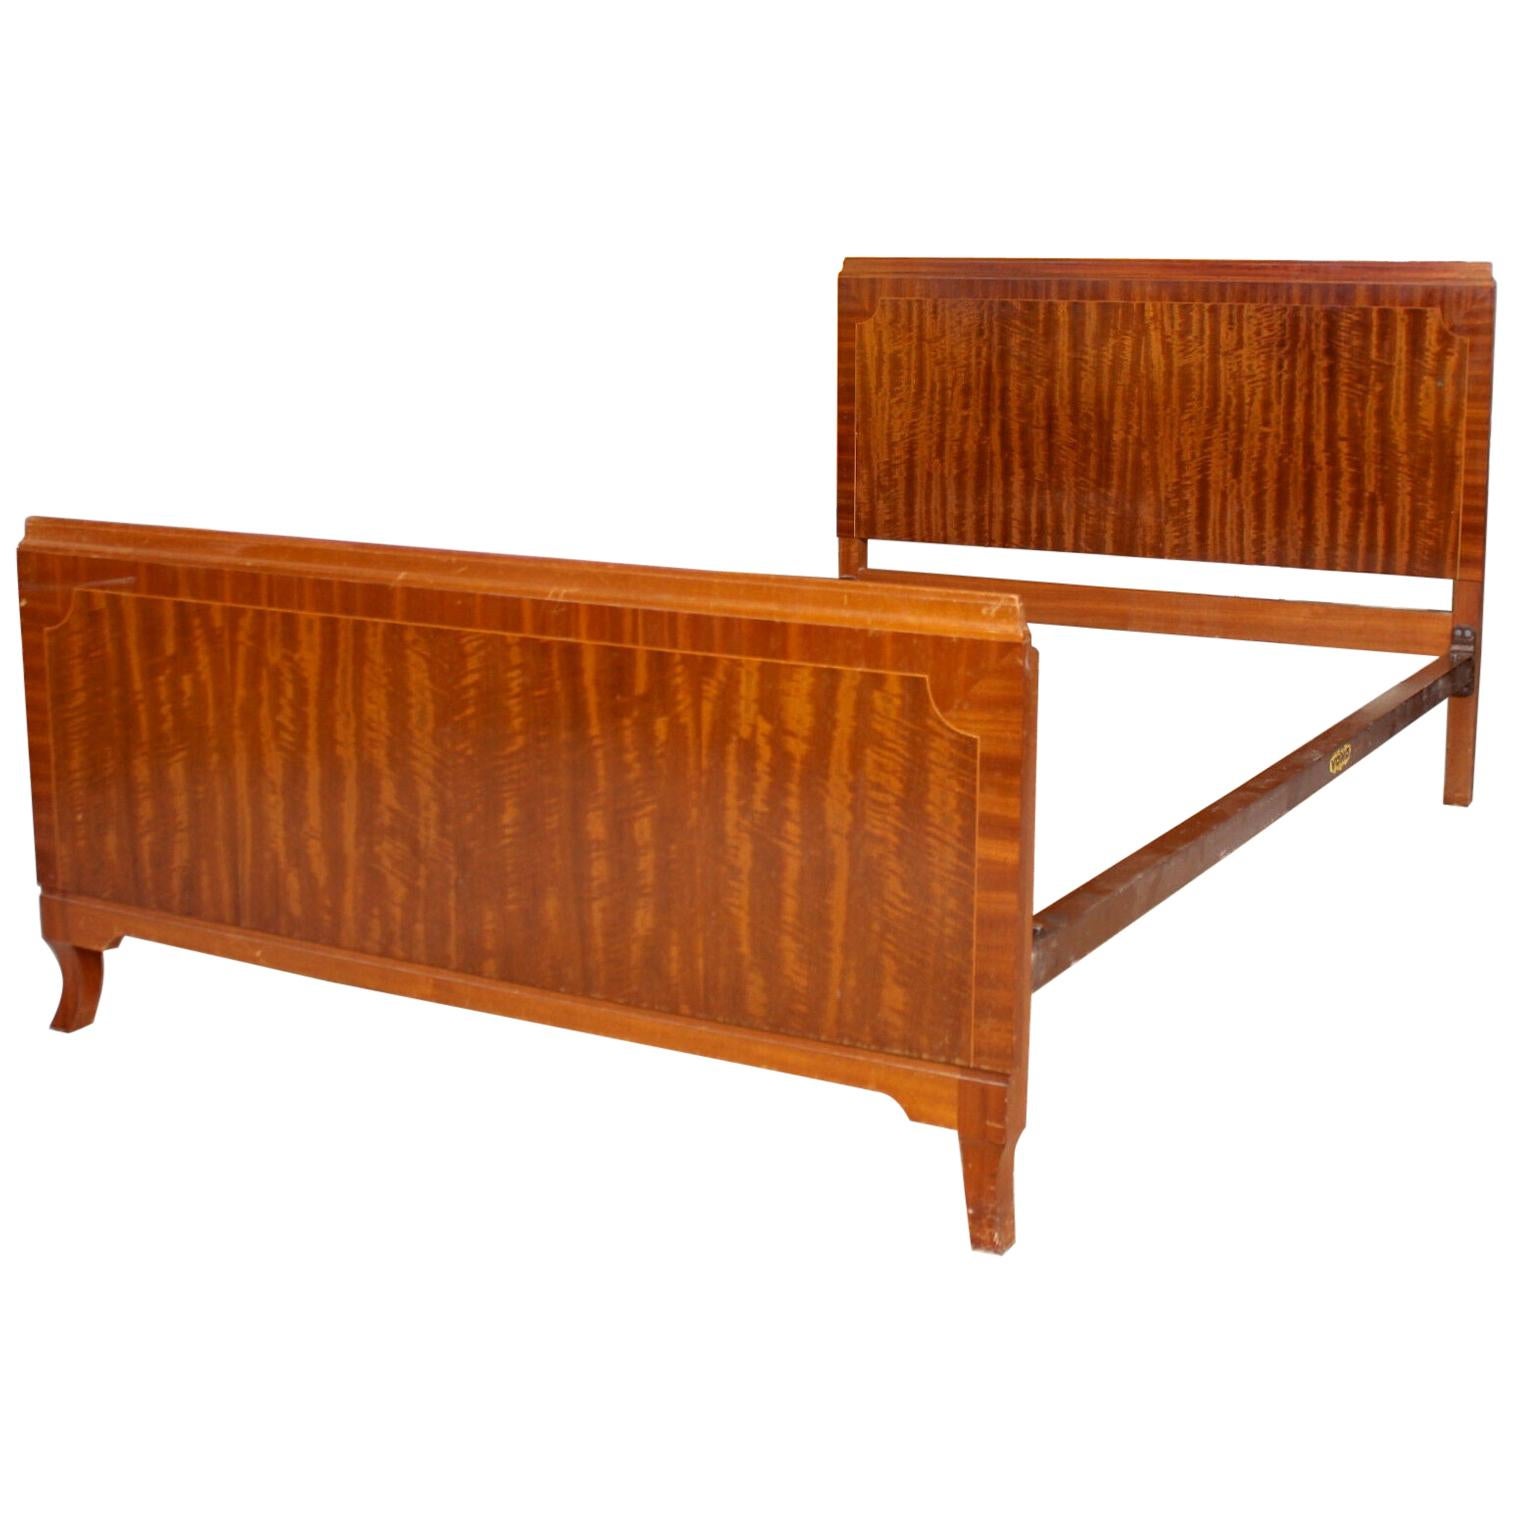 English Bed Frame Maple & Co Inlaid Mahogany For Sale